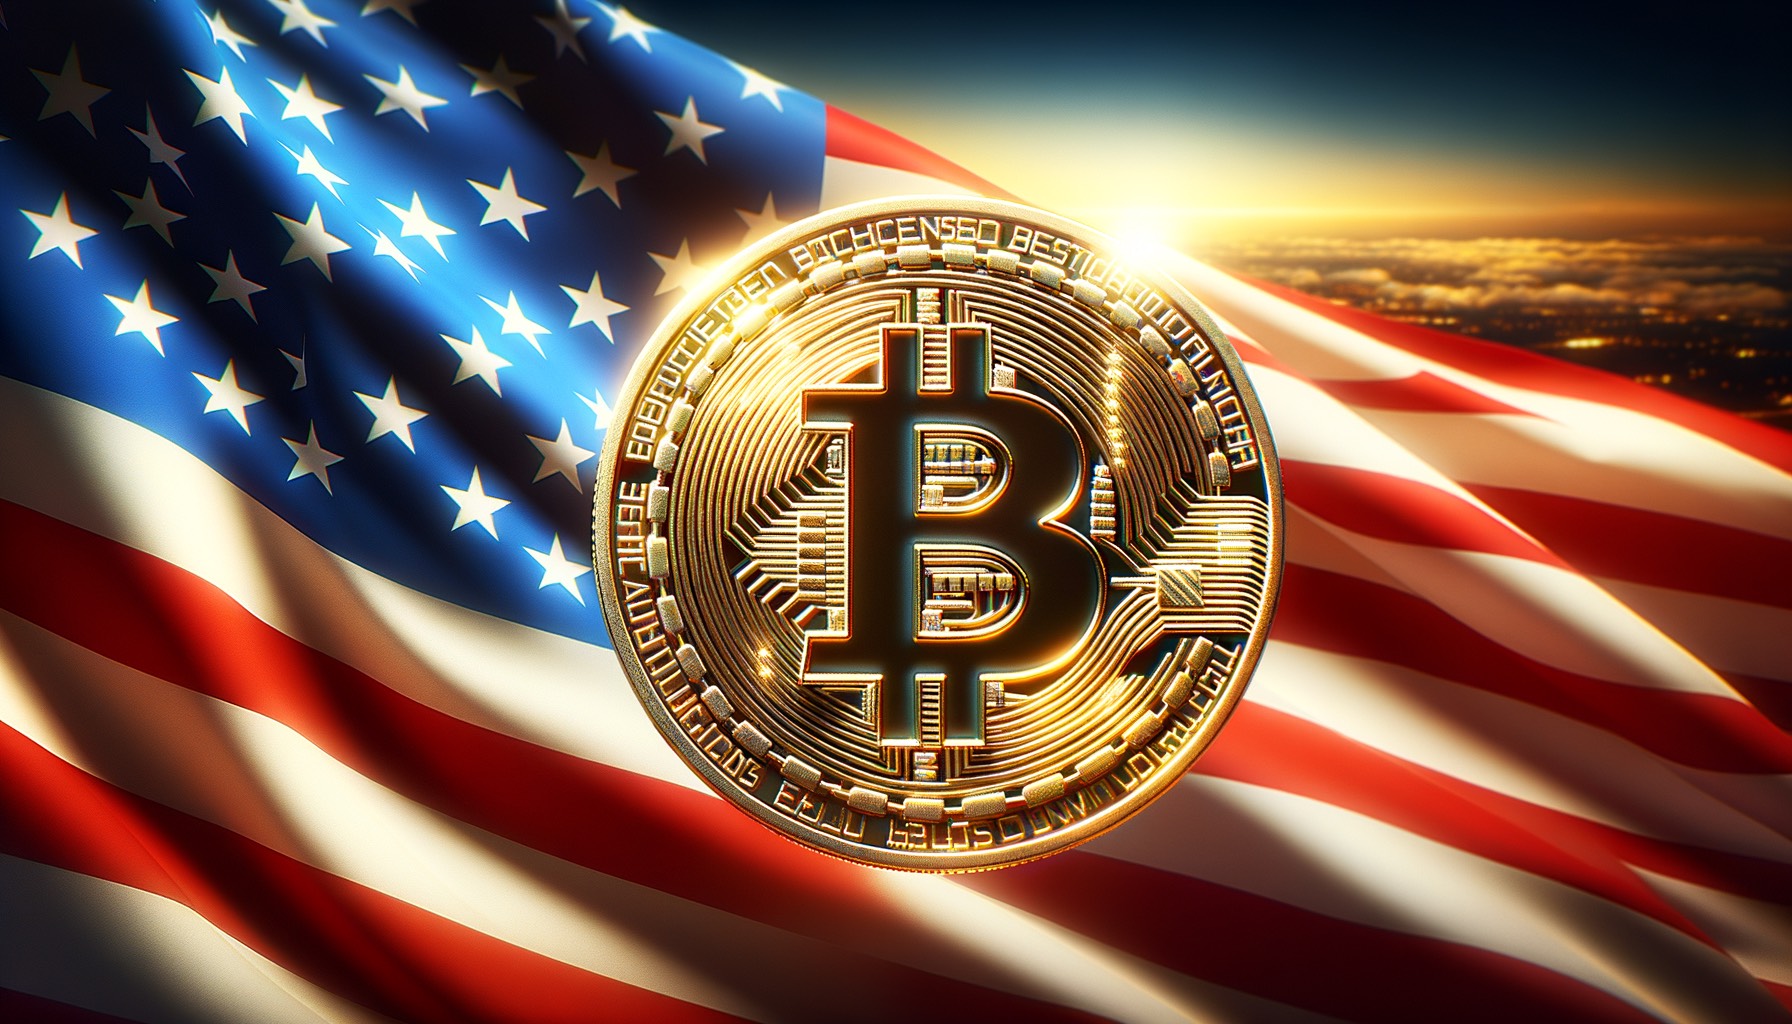 US Congressman Introduces Bill to Allow Income Tax Payments in Bitcoin